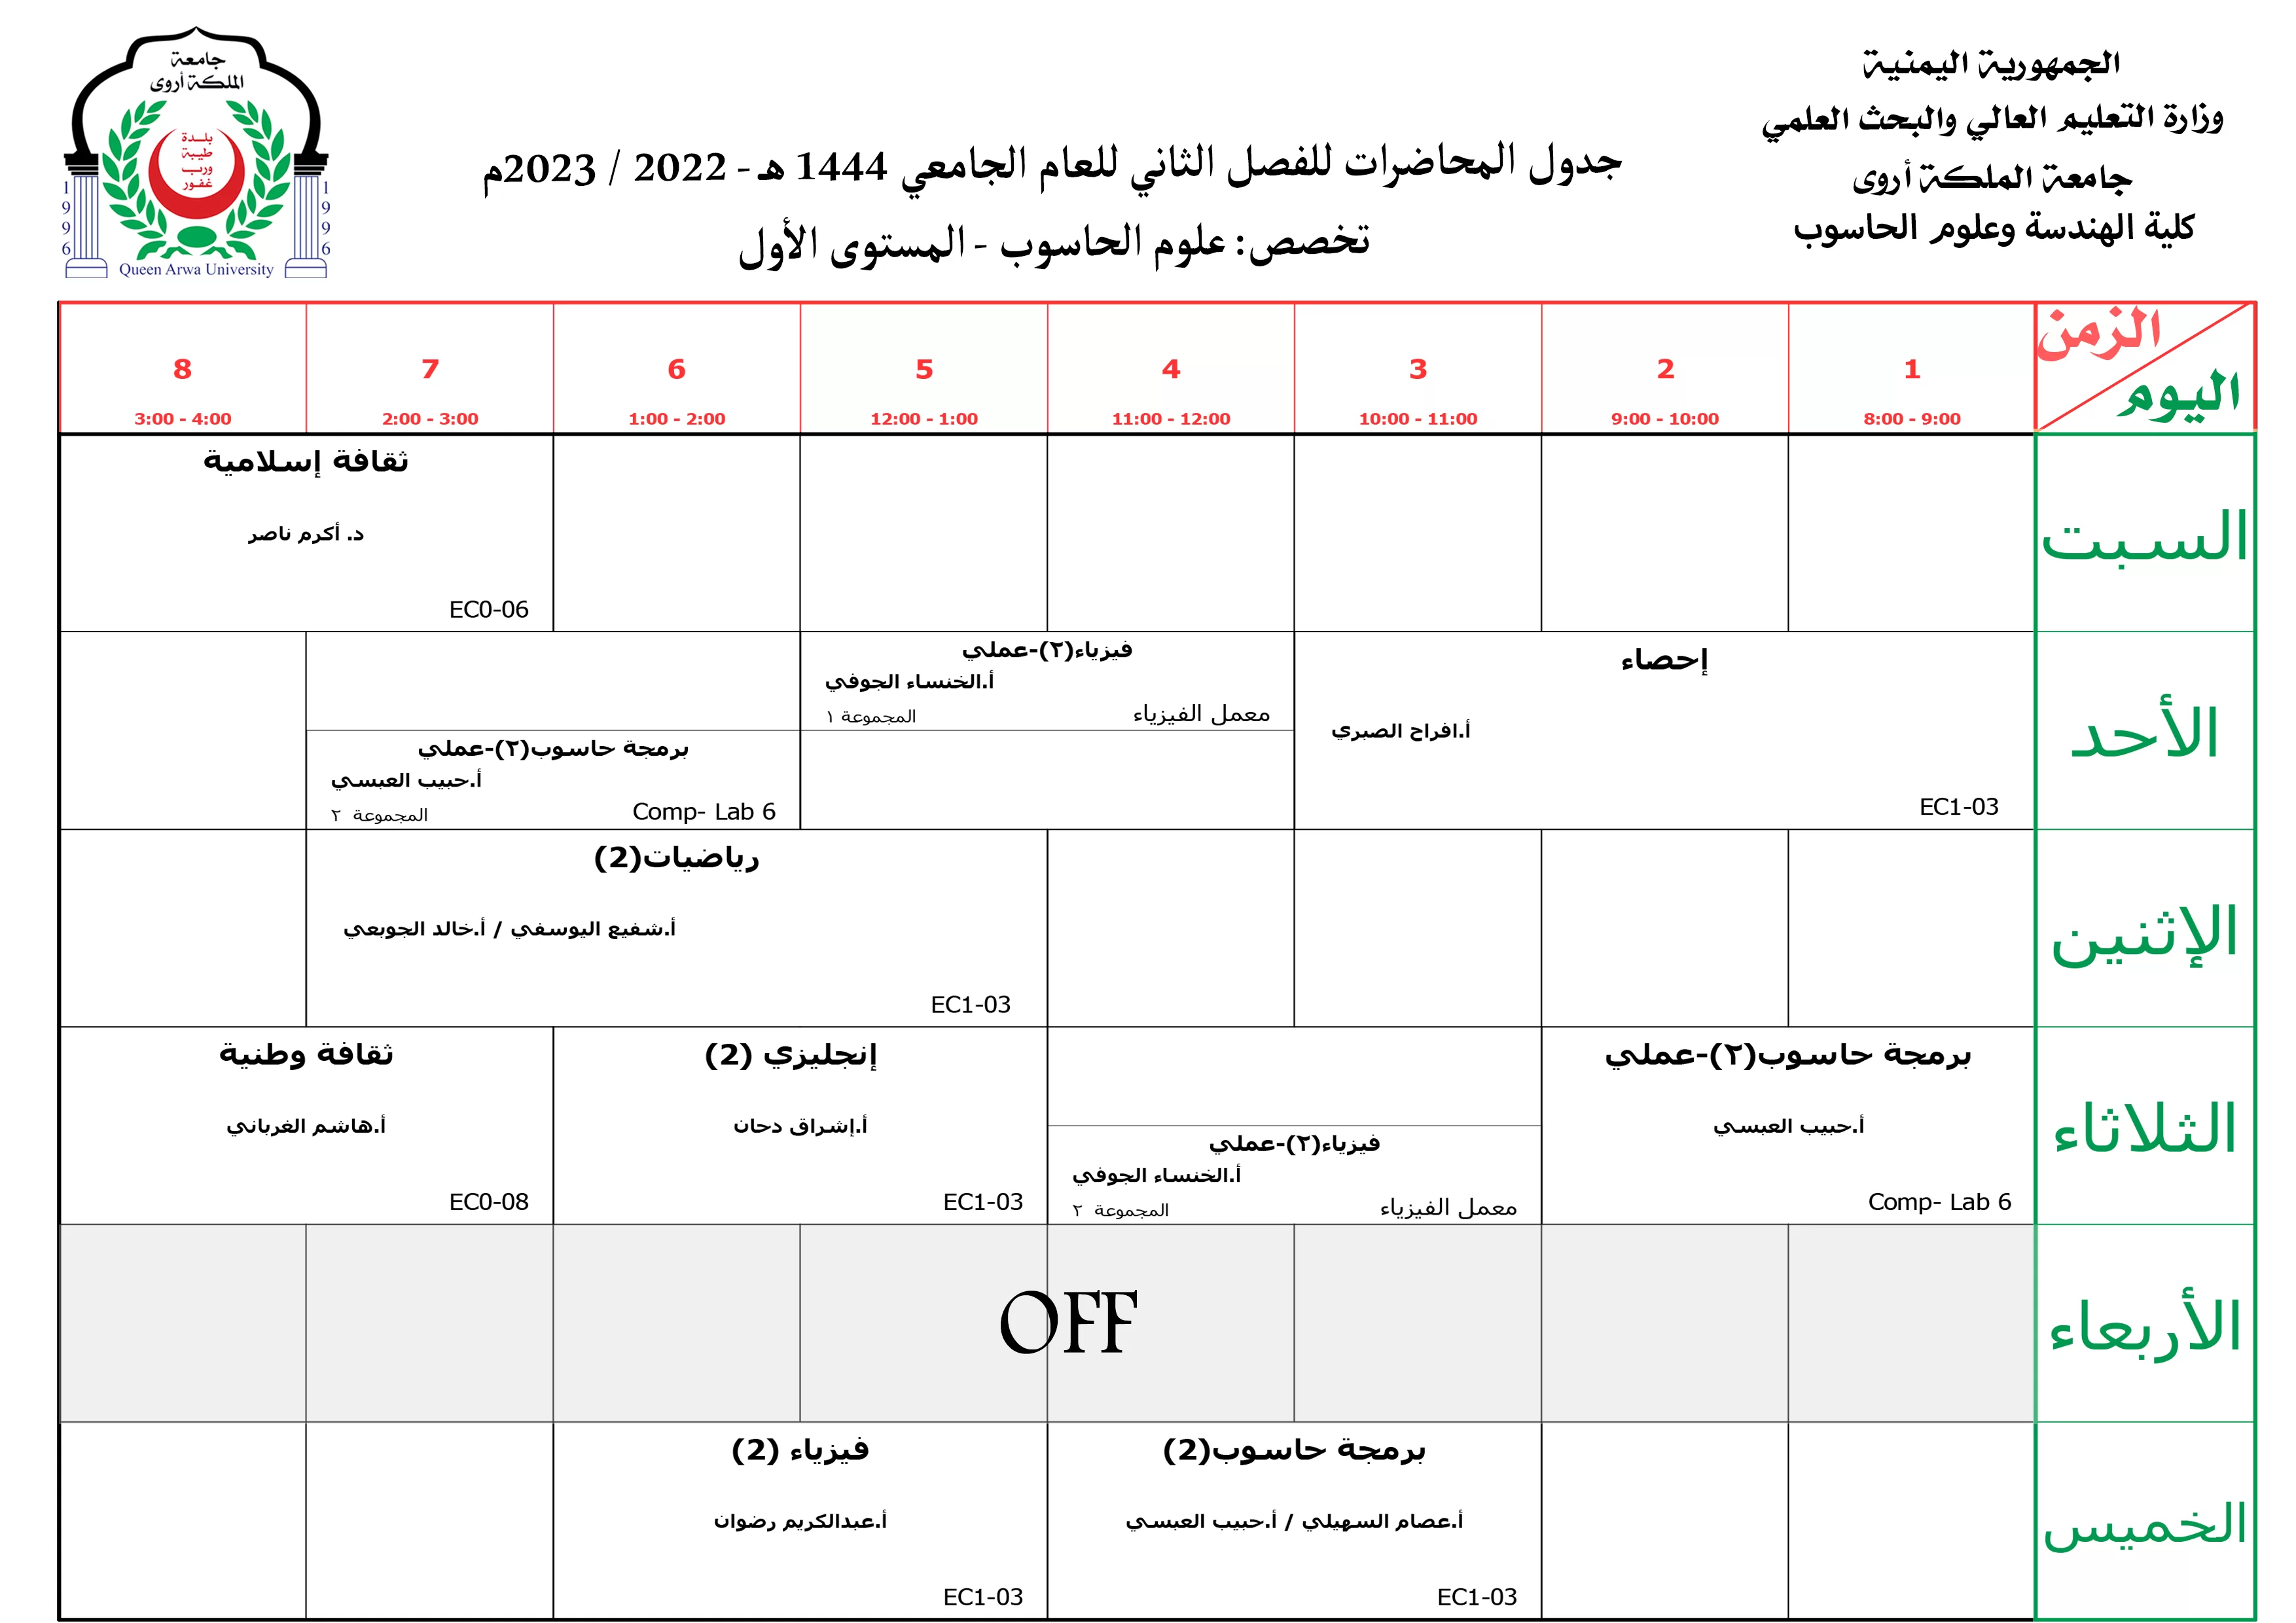 Lecture schedules